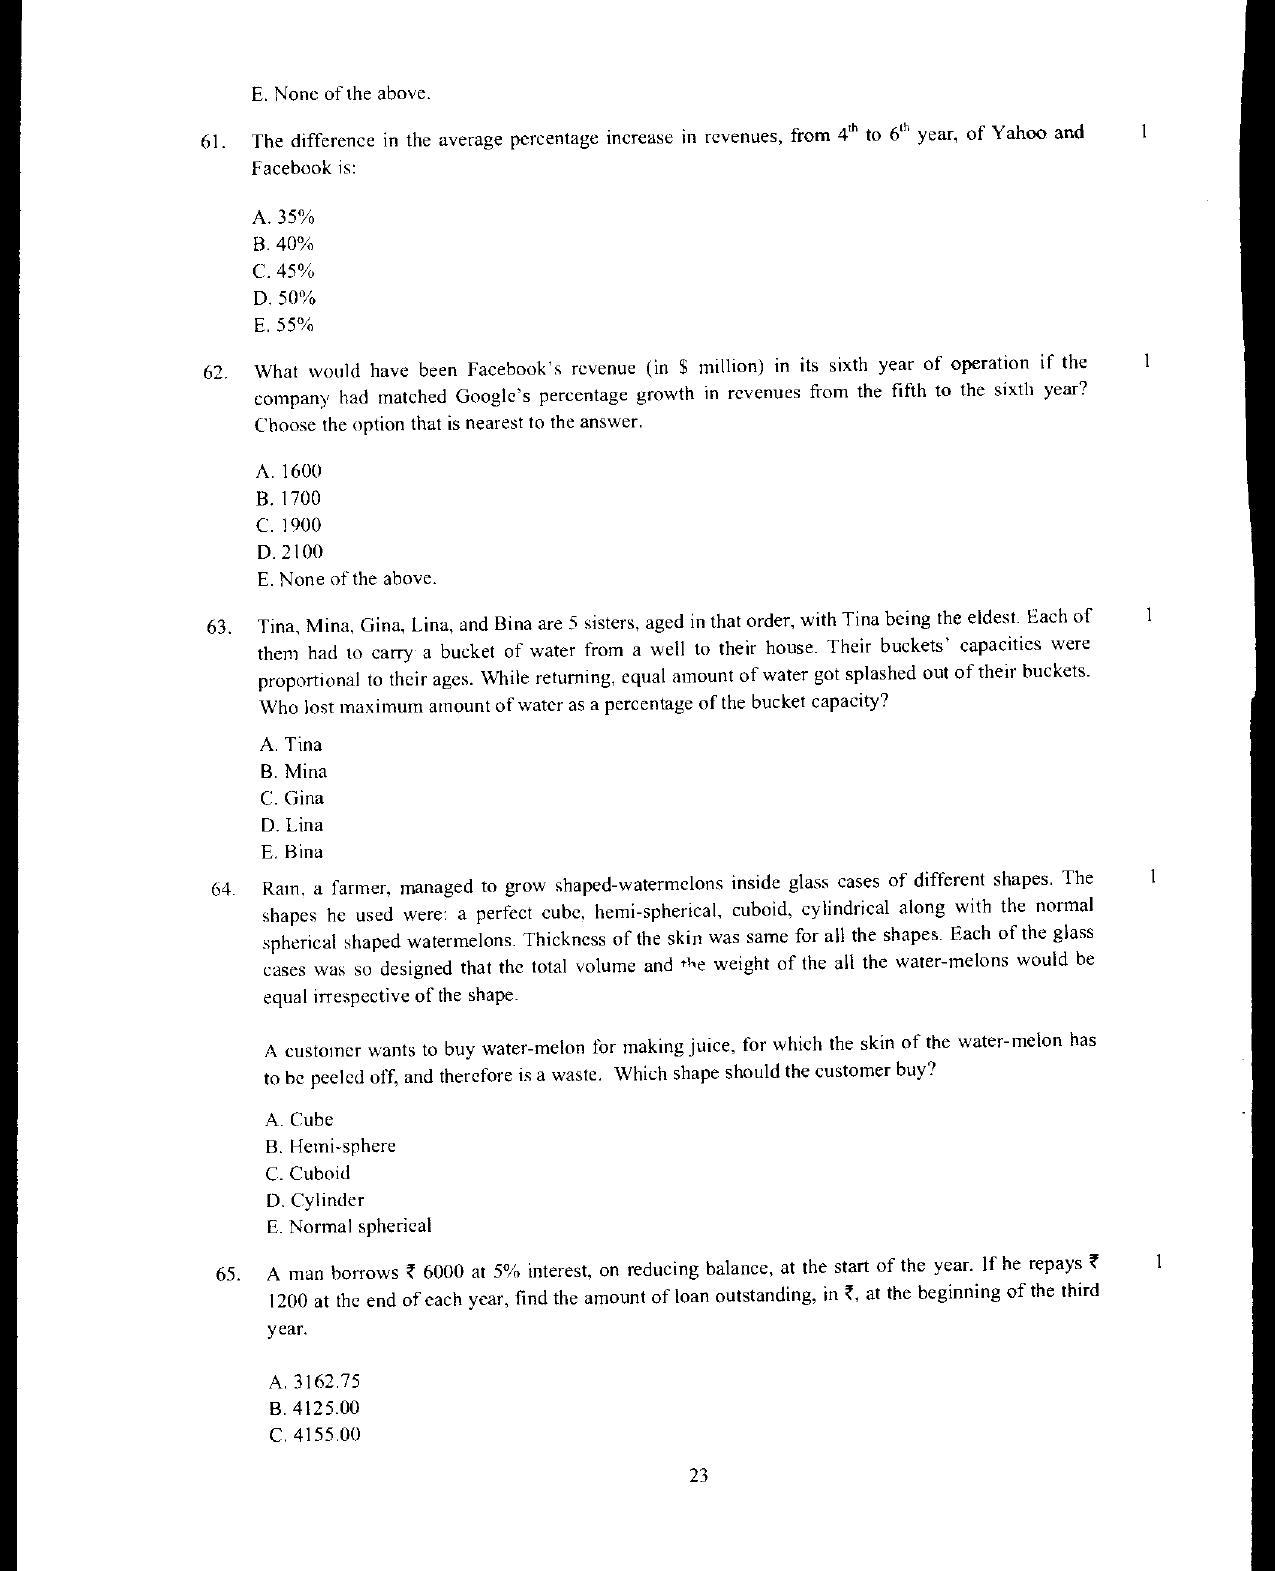 XAT 2012 Question Papers - Page 24